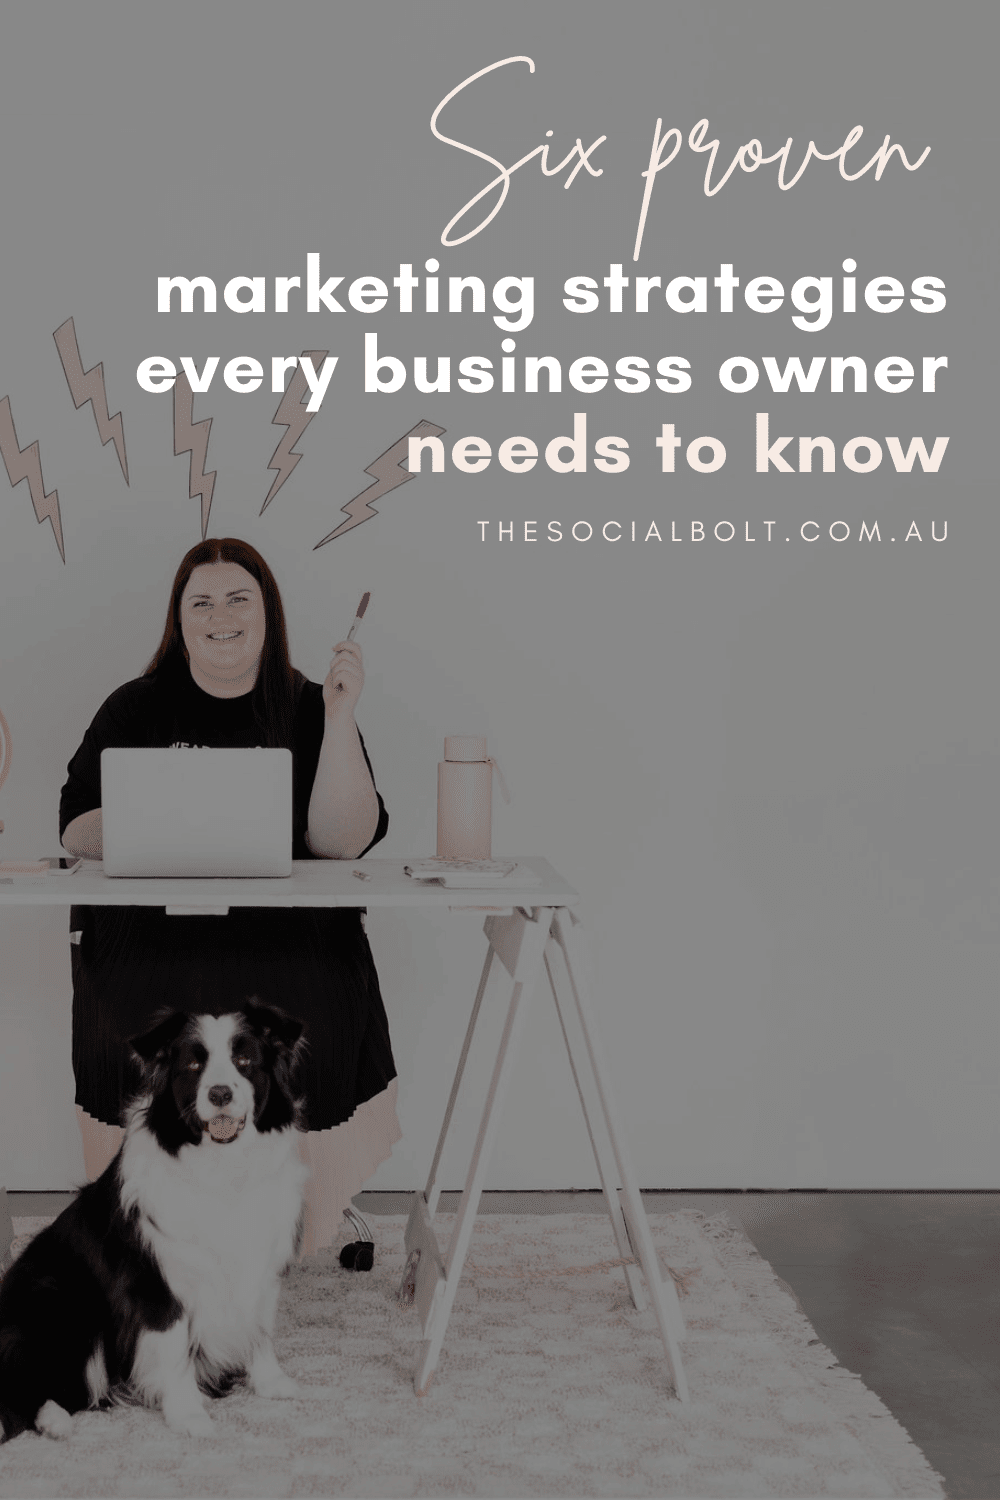 6 Proven Marketing Strategies Every Business Owner Needs To Know